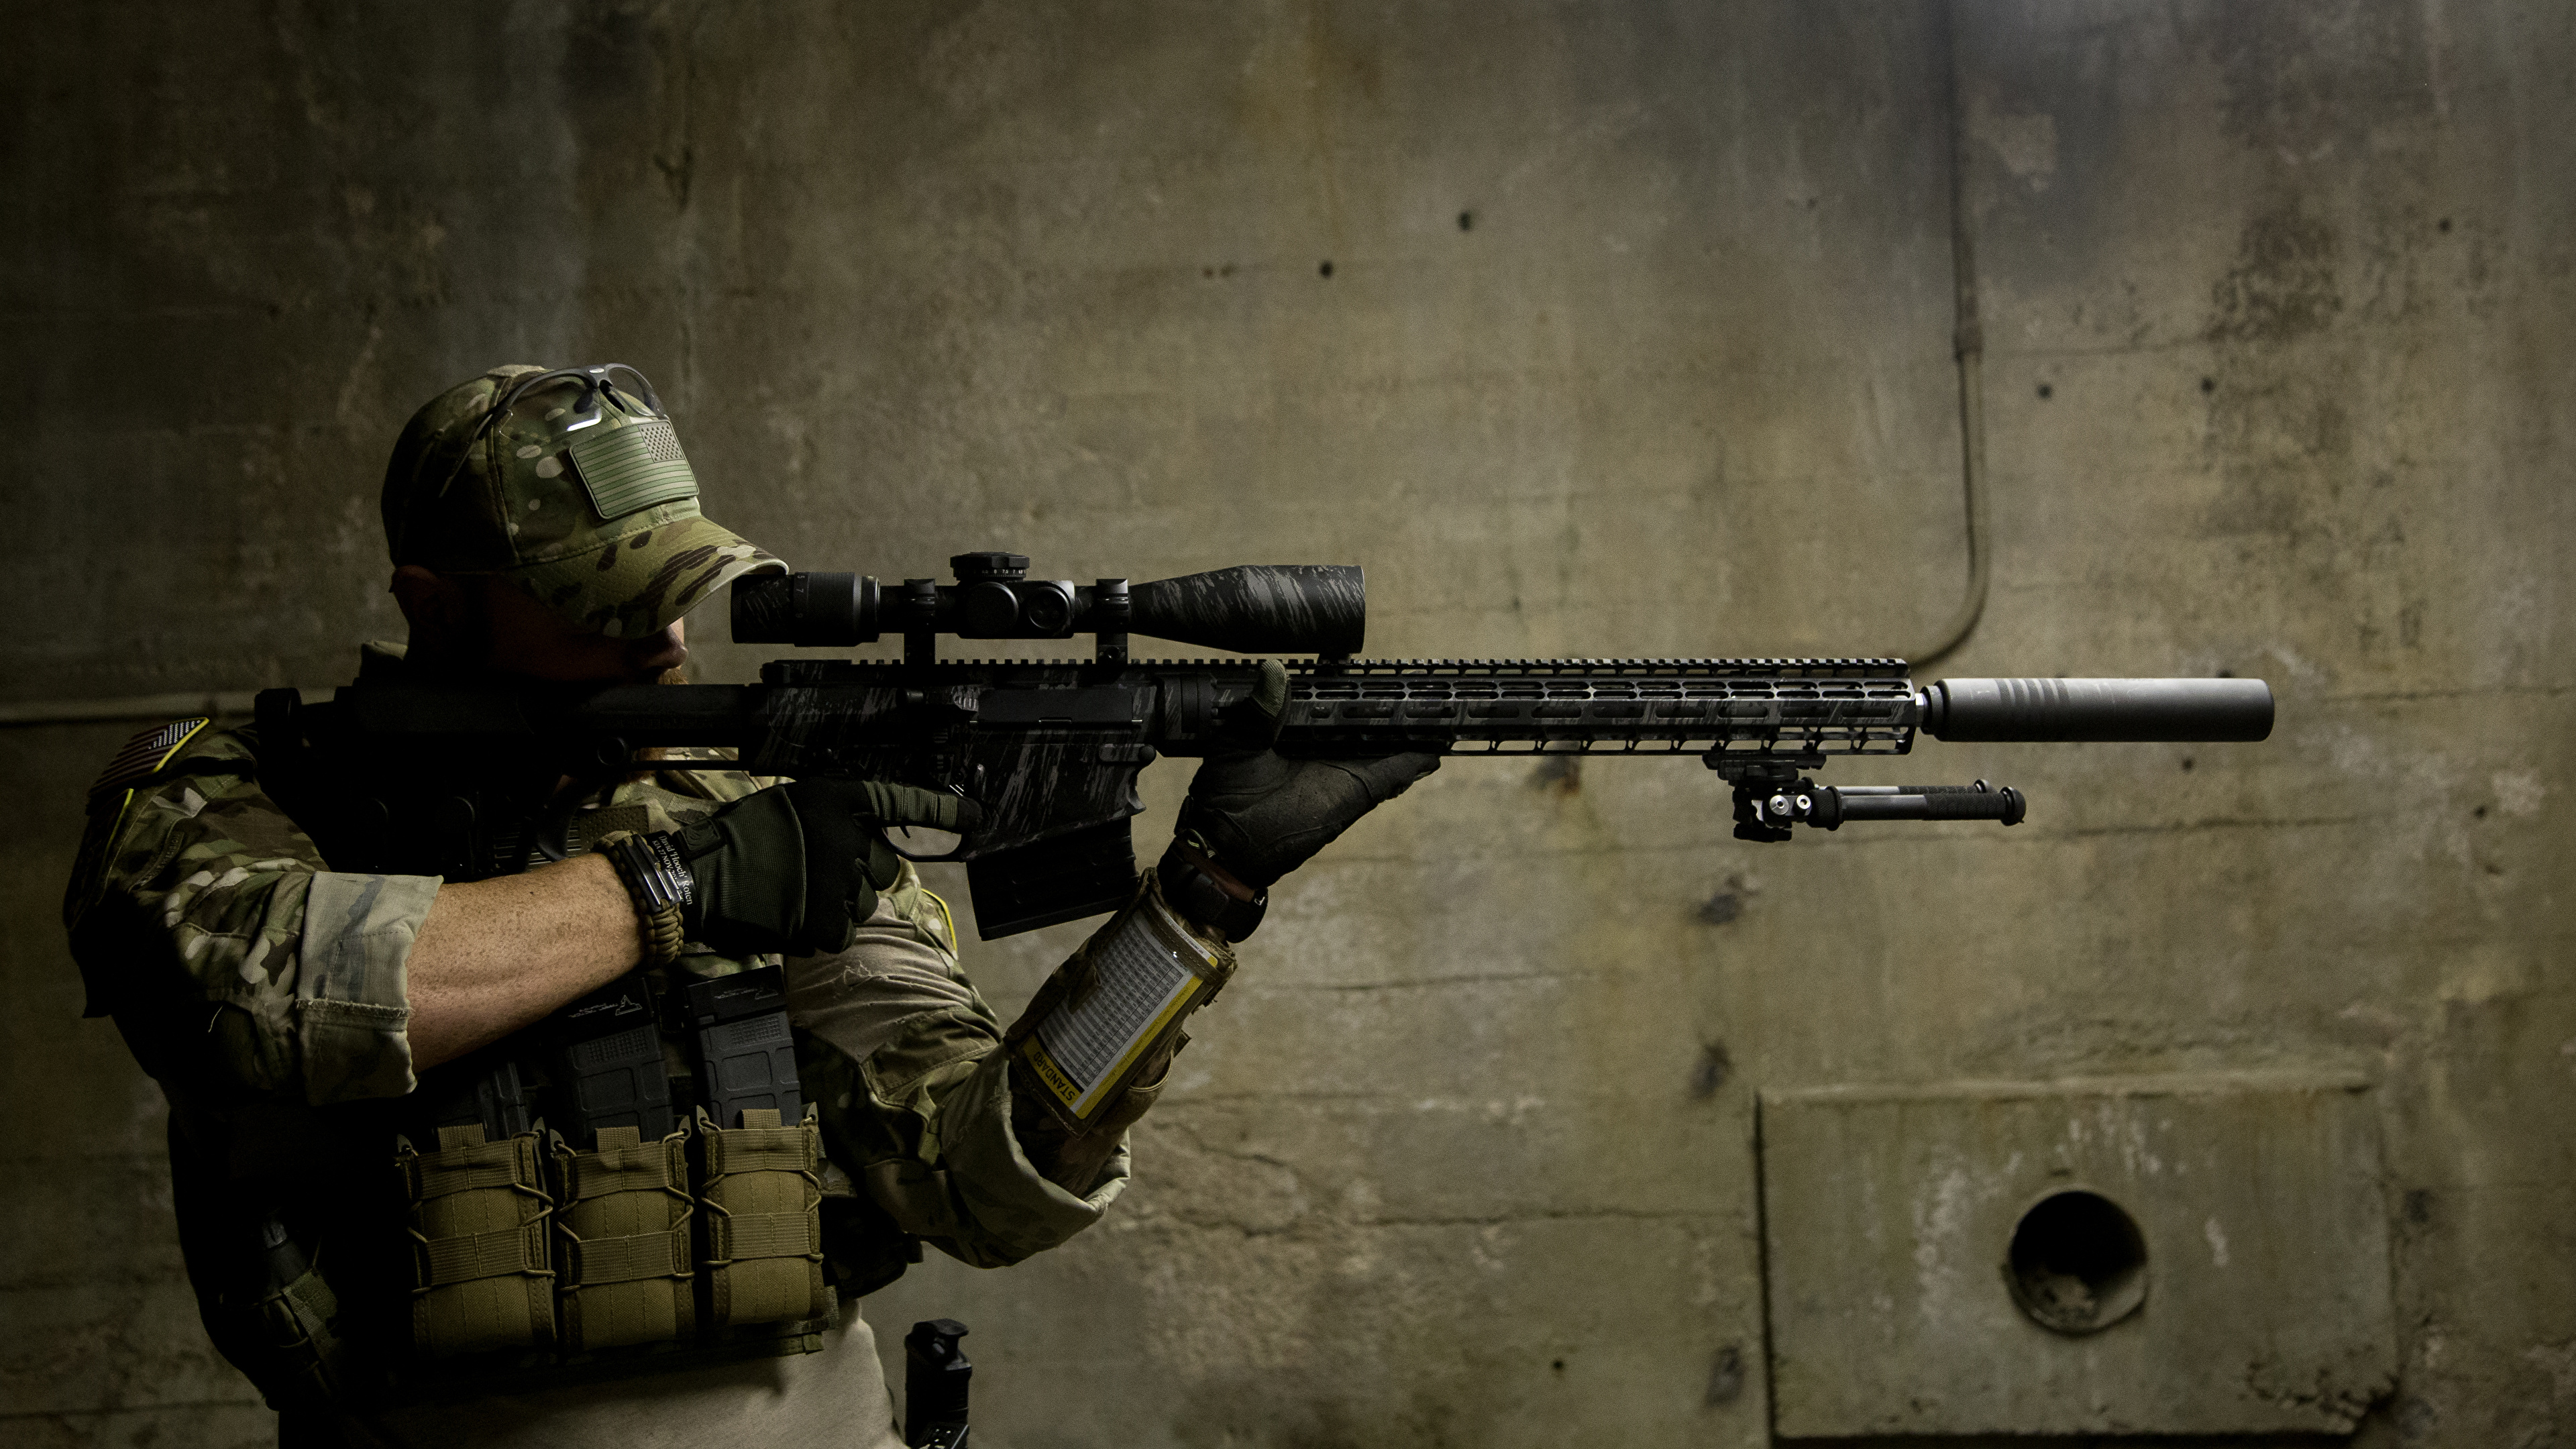 Wallpaper Sniper rifle Snipers Soldiers Army 3840x2160